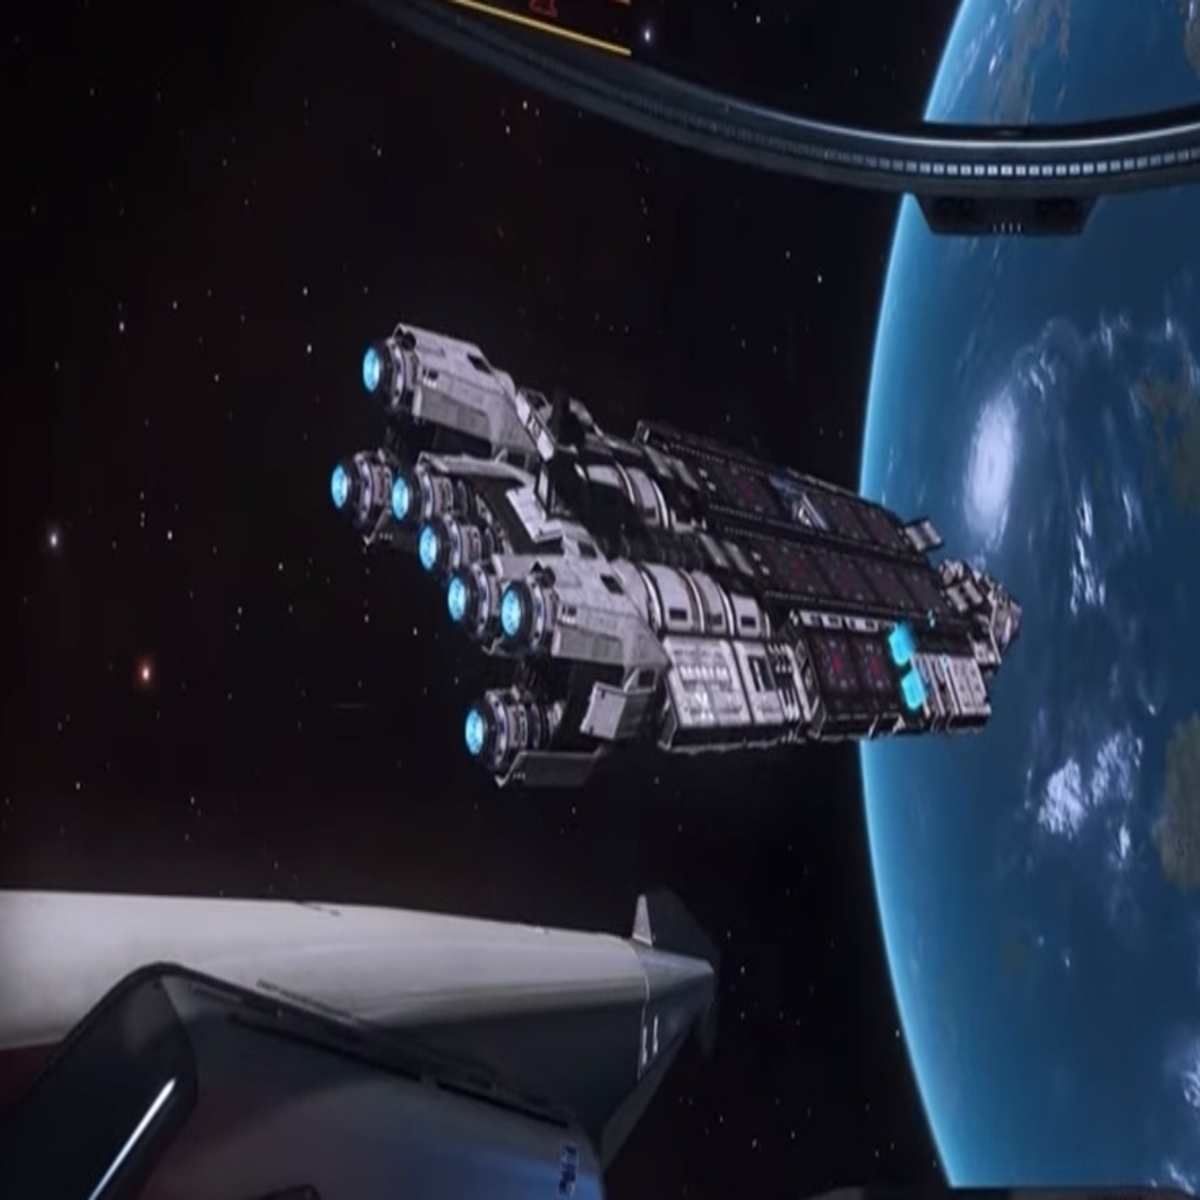 Elite: Dangerous release and pre-order prices revealed - Multiple ship  ownership confirmed